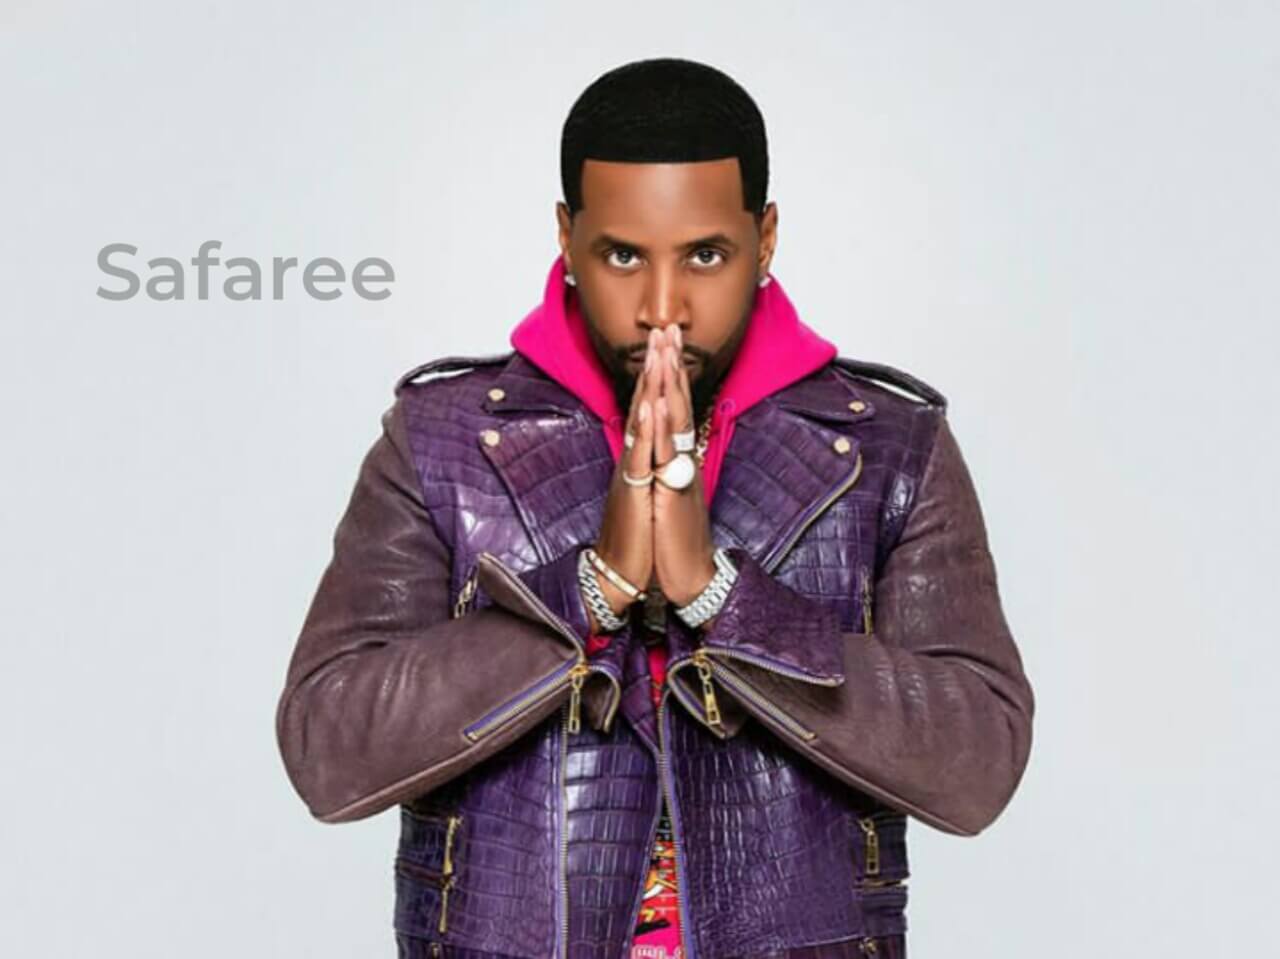 Safaree Drops His Quarantine Live Edition Of An Unreleased Track - See The Video Here